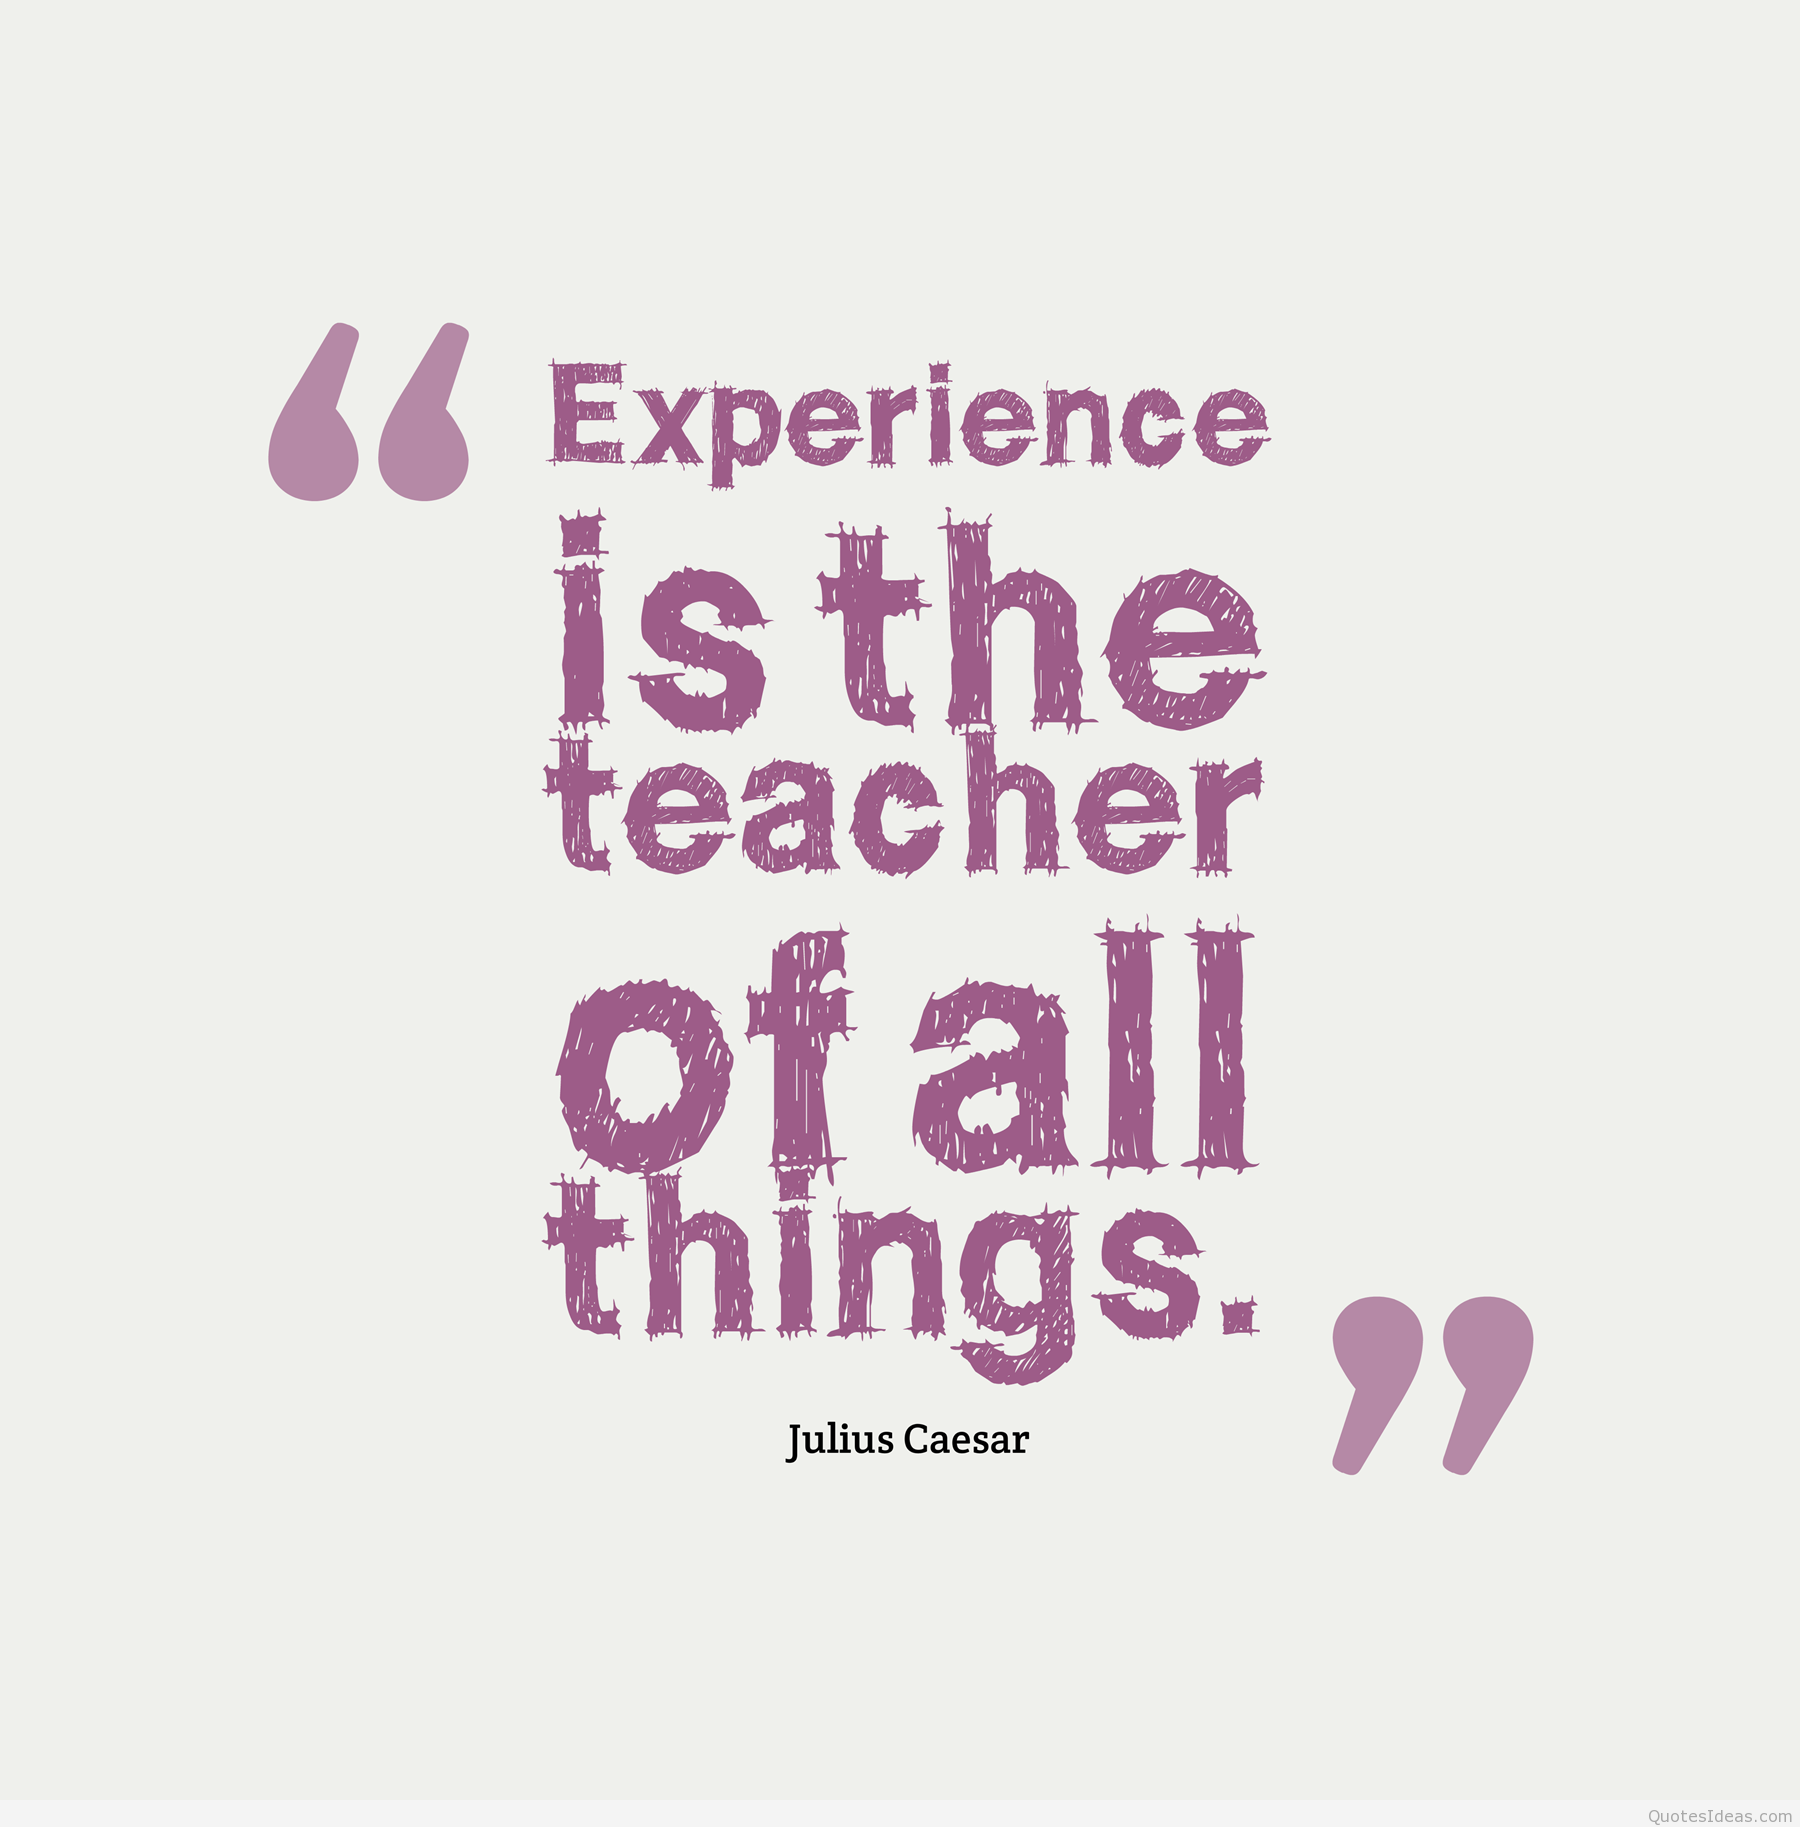 Experience is the teacher of all things. Julius Caesar